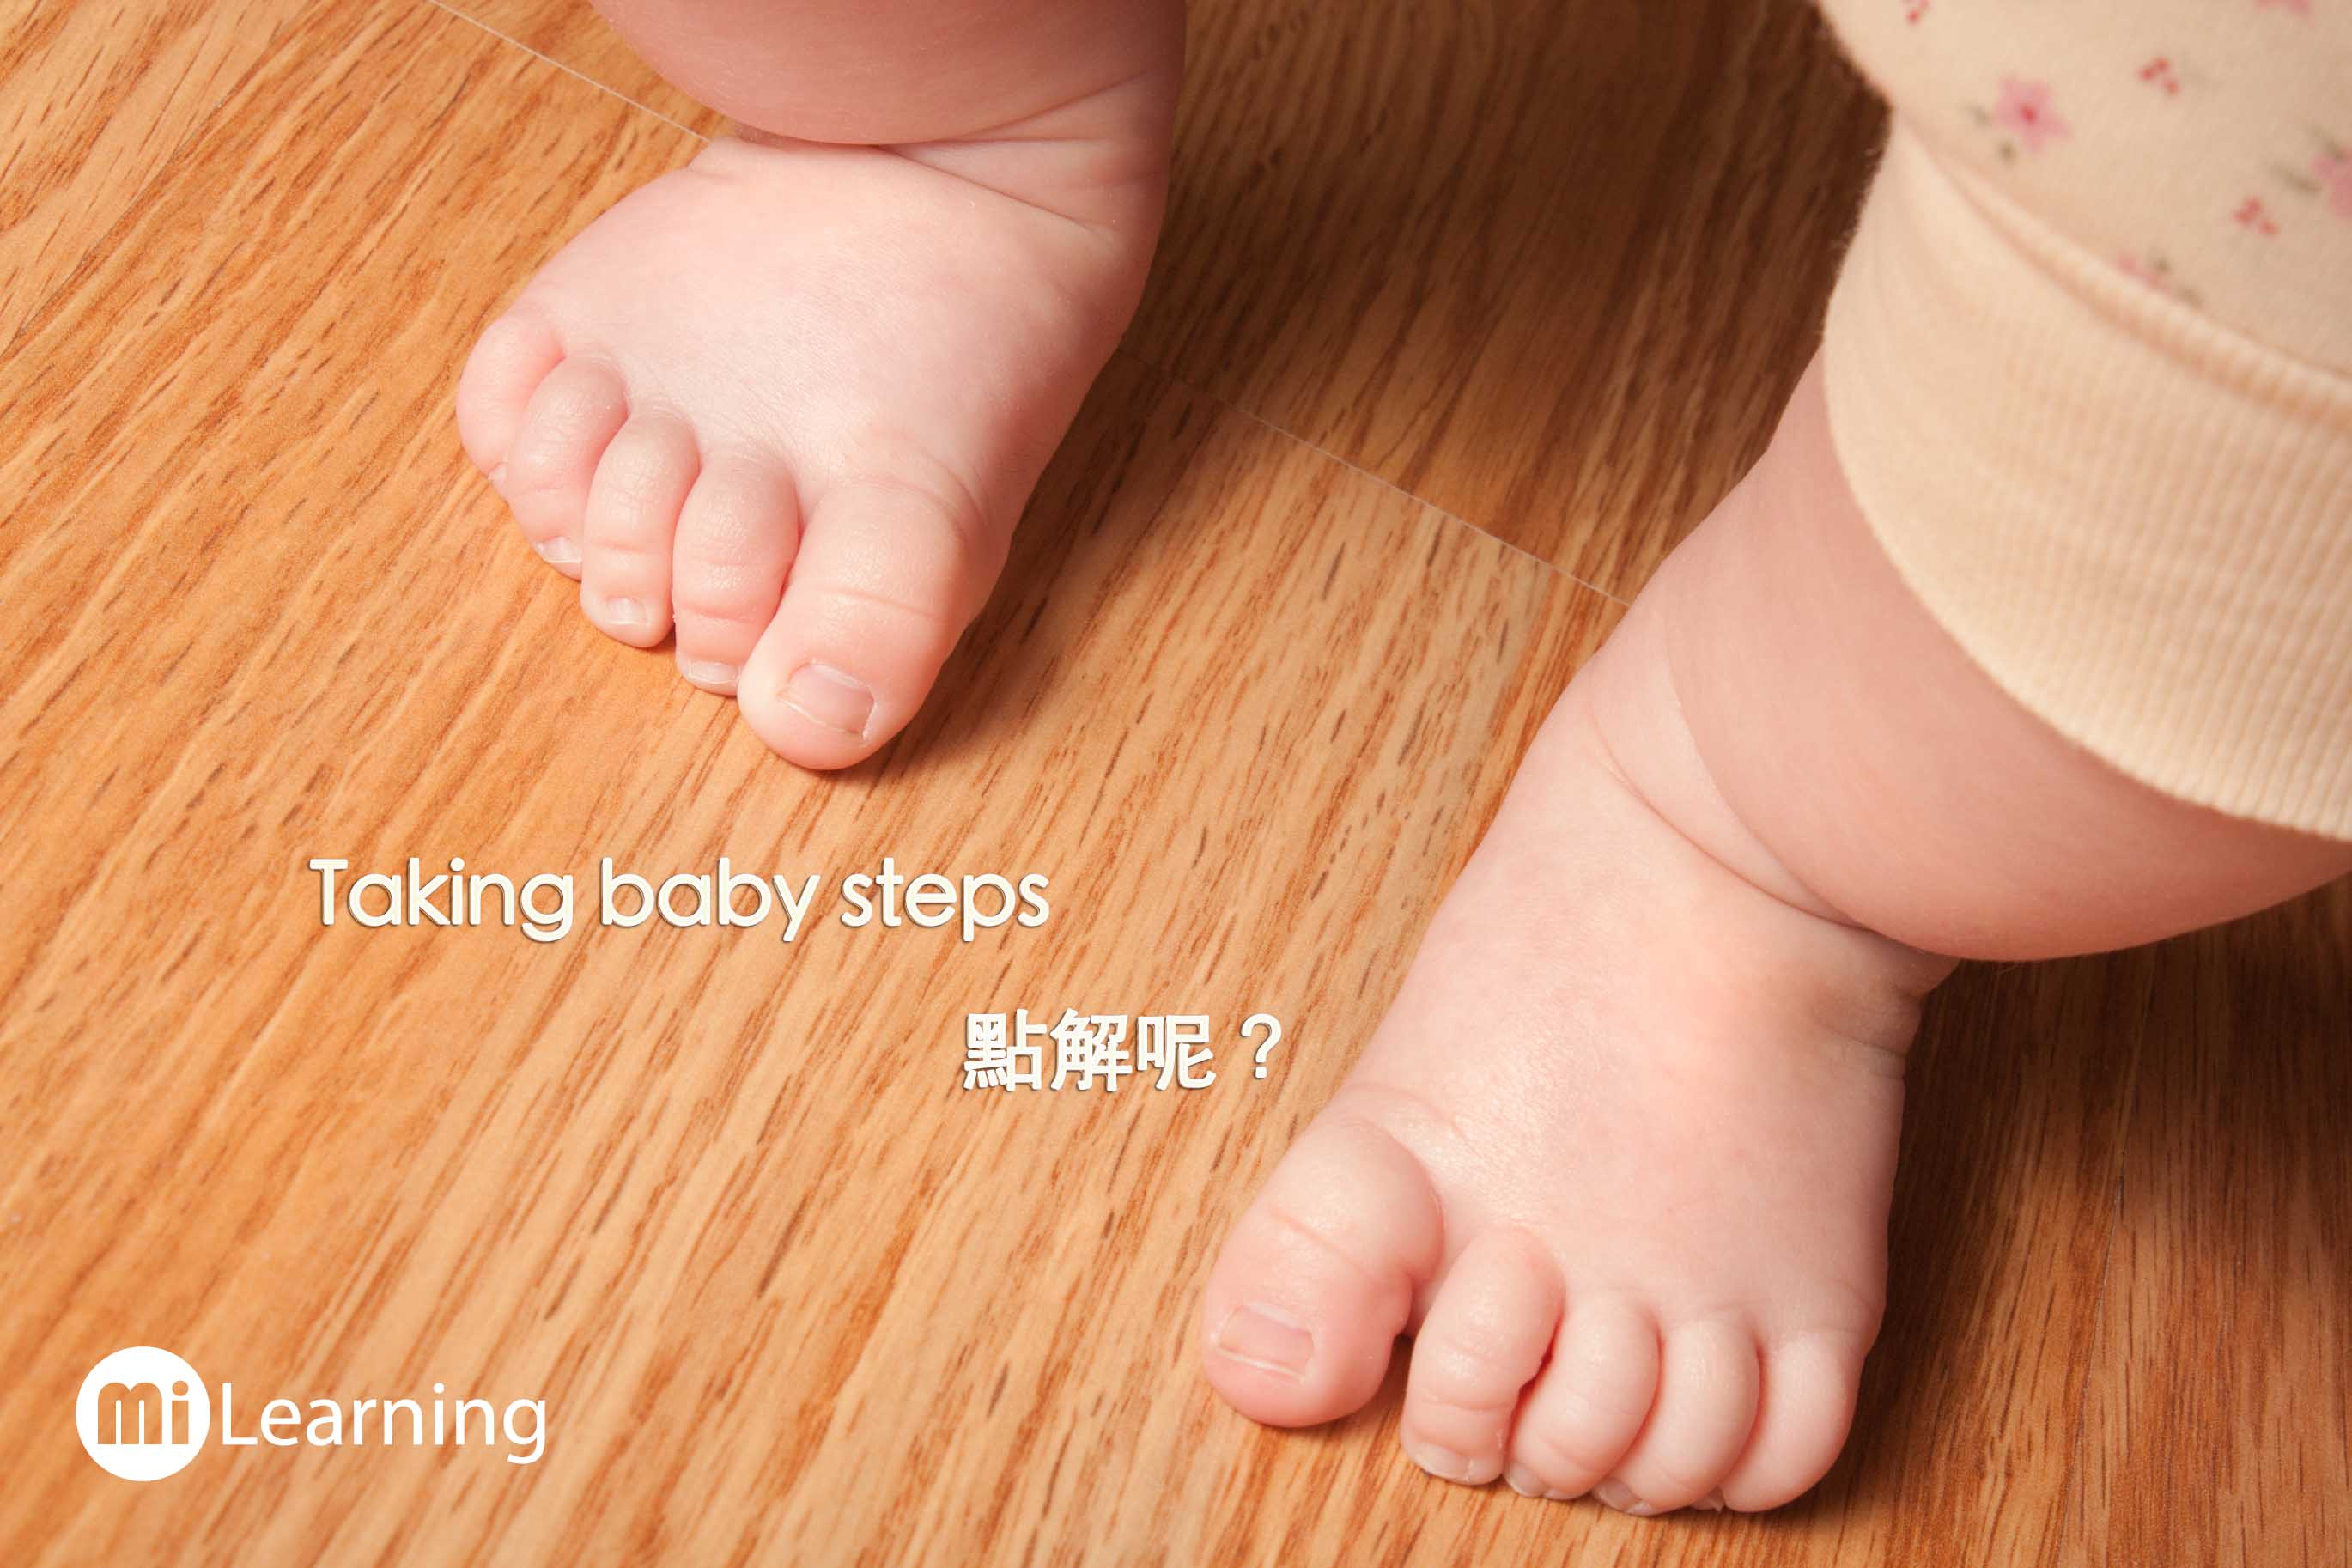 Taking baby steps